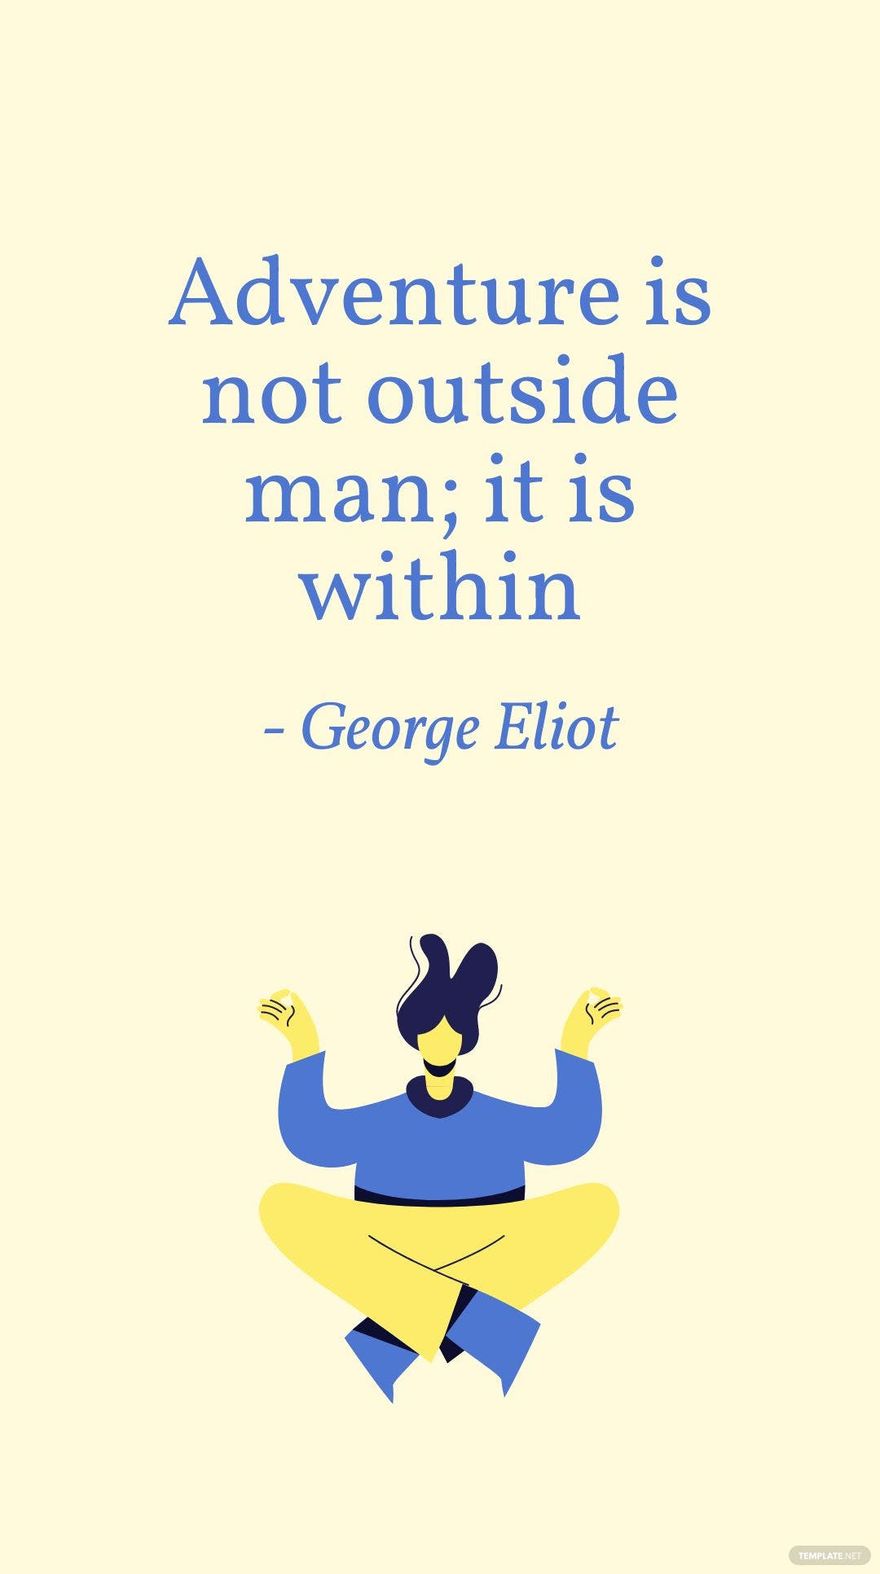 George Eliot - Adventure is not outside man; it is within